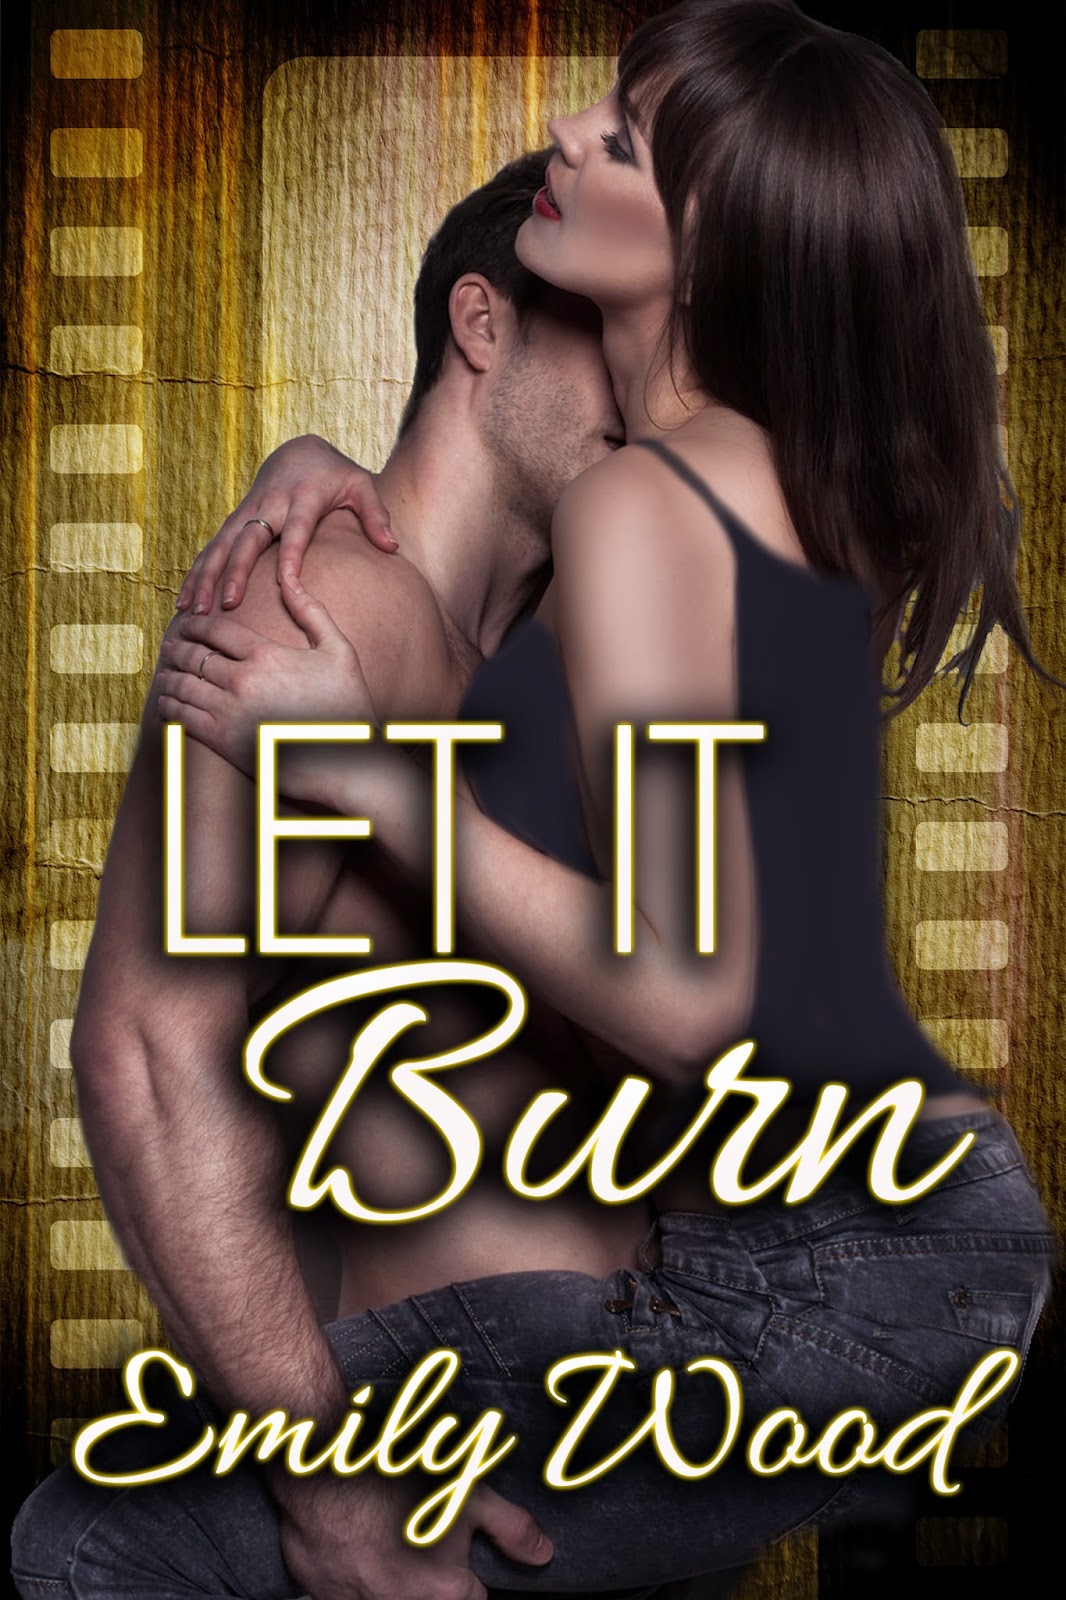 Let it Burn - with Emily Wood